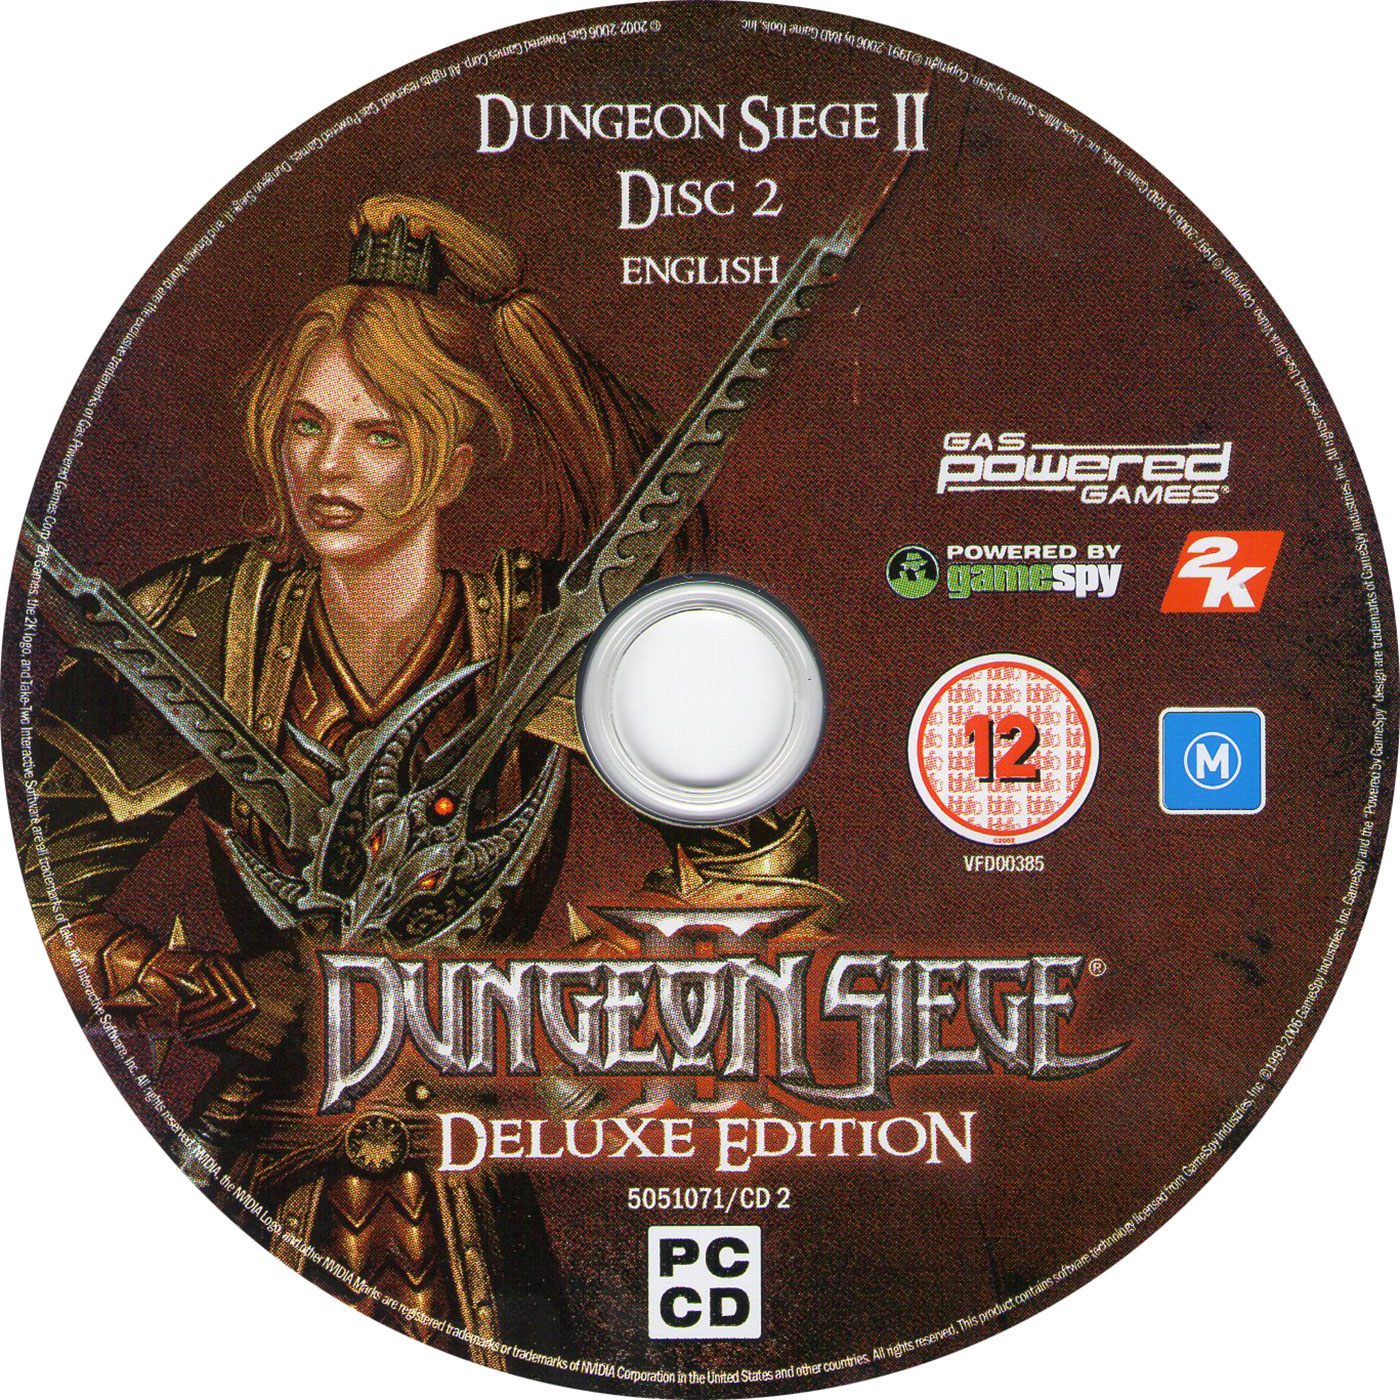 Dungeon Siege II: Deluxe Edition - CD obal 2